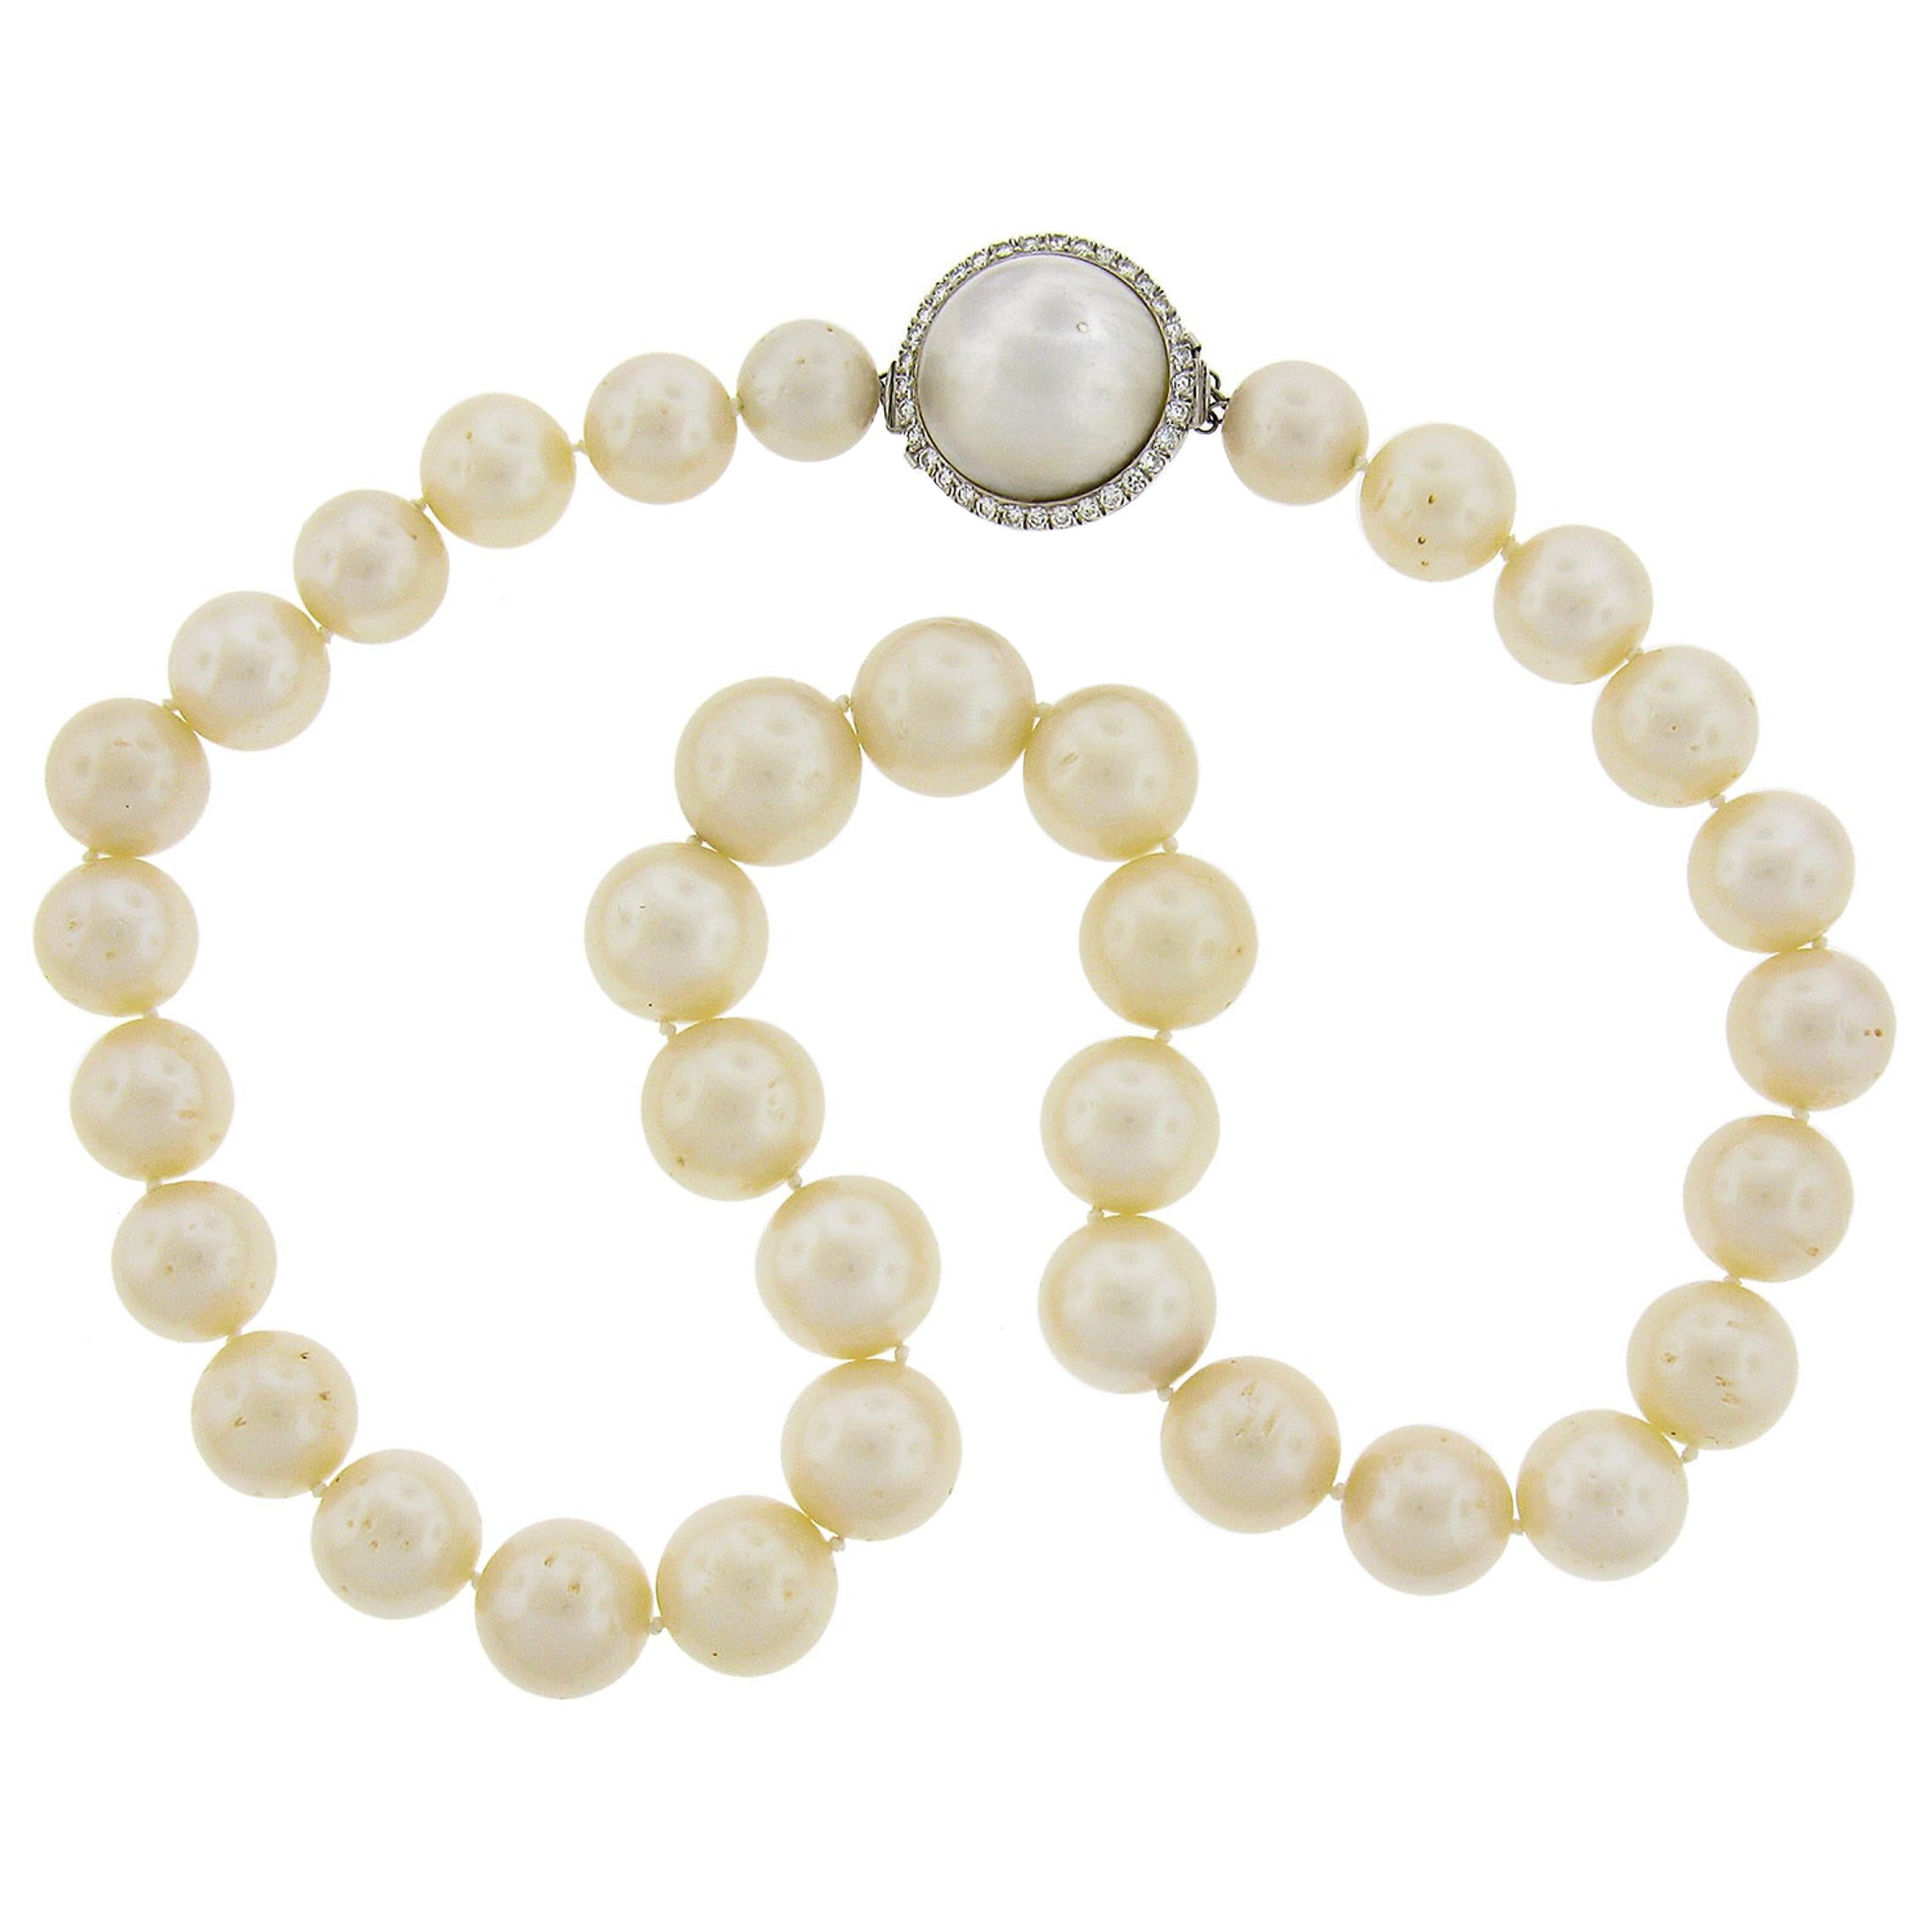 20" GIA Cultured Pearl Strand Necklace w/ 14k Gold Diamond & Mabe Pearl Clasp